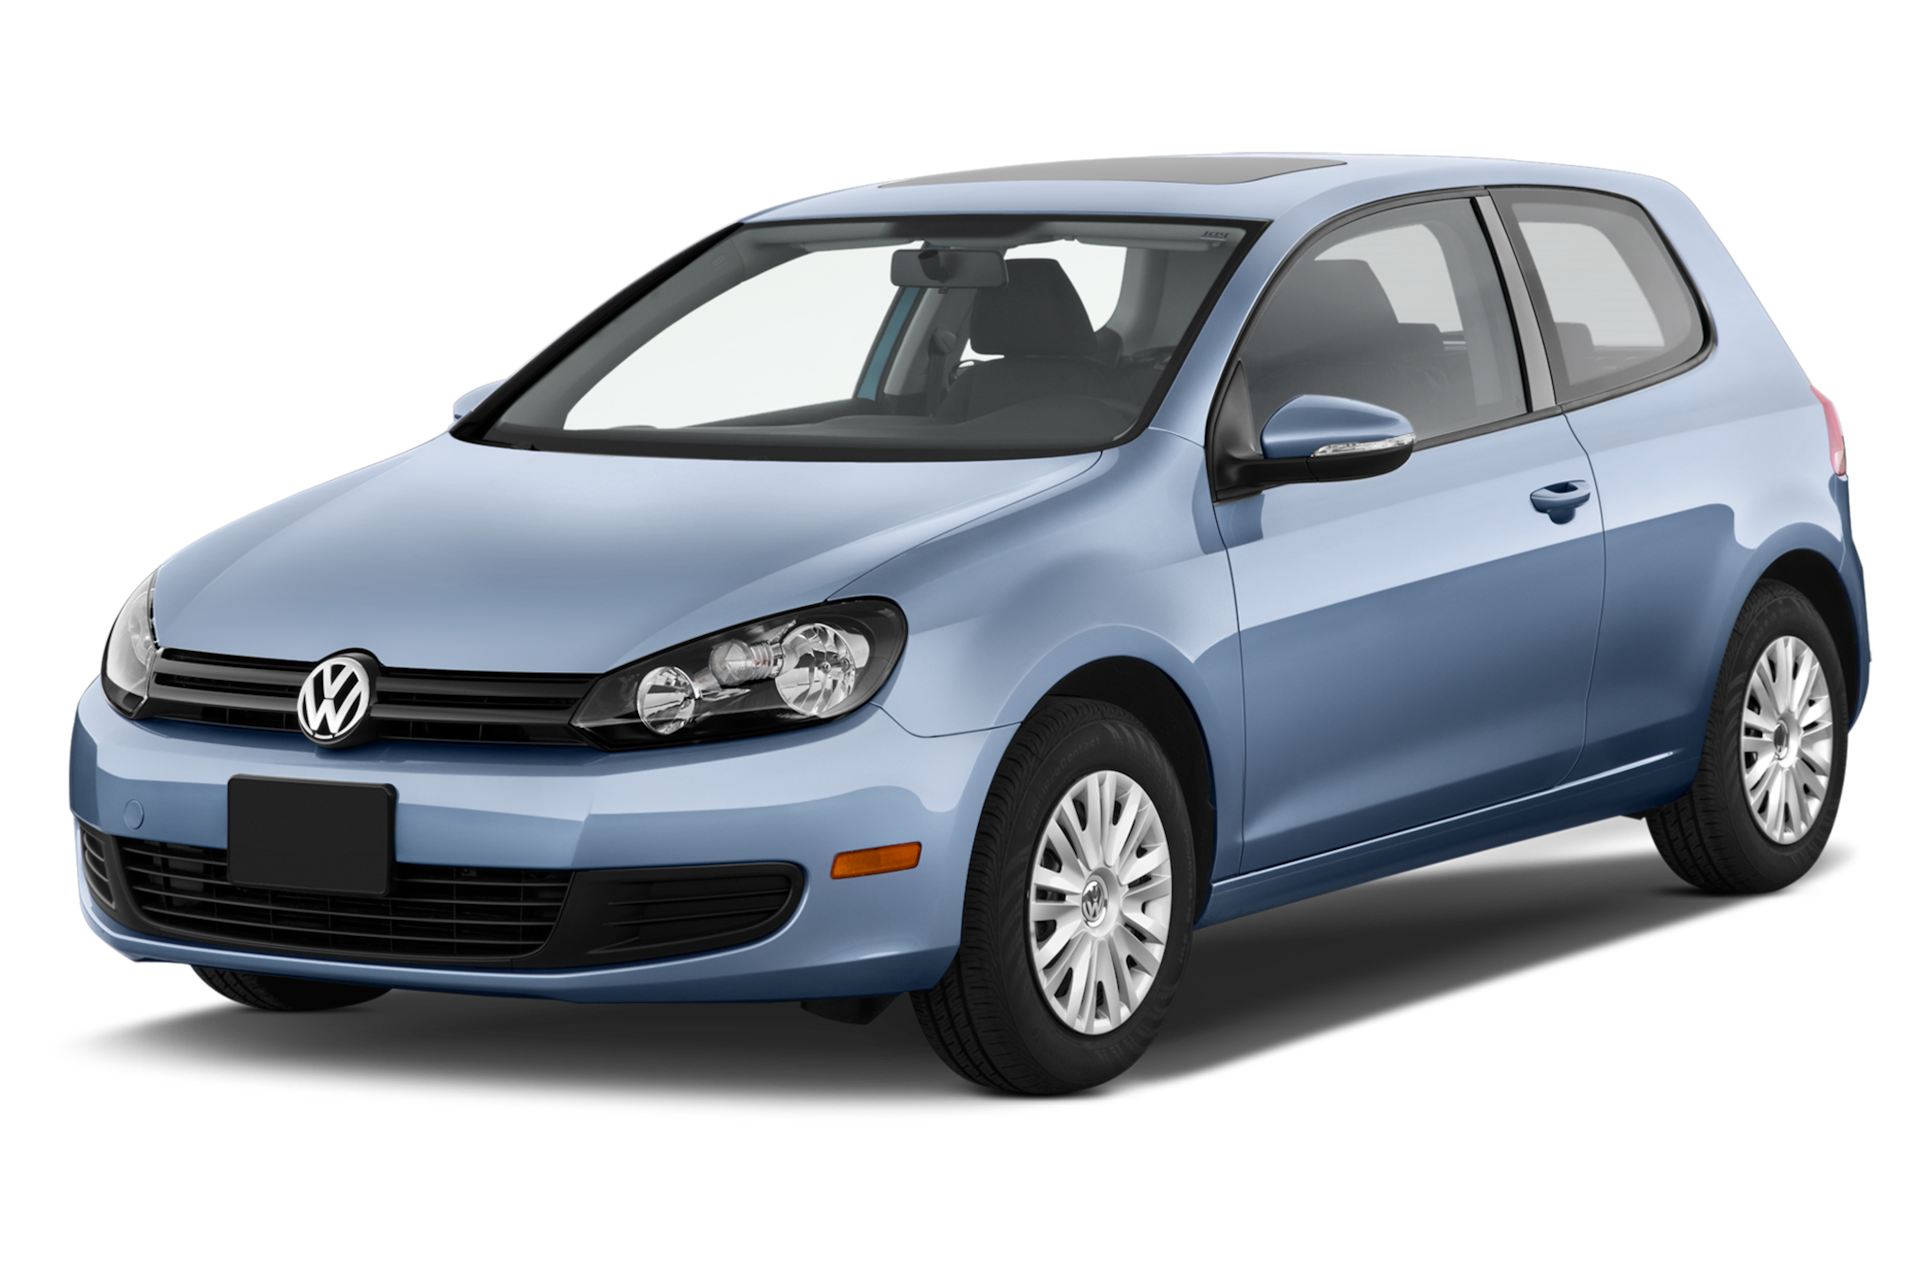 2012 Volkswagen Golf Prices, Reviews, and Photos - MotorTrend